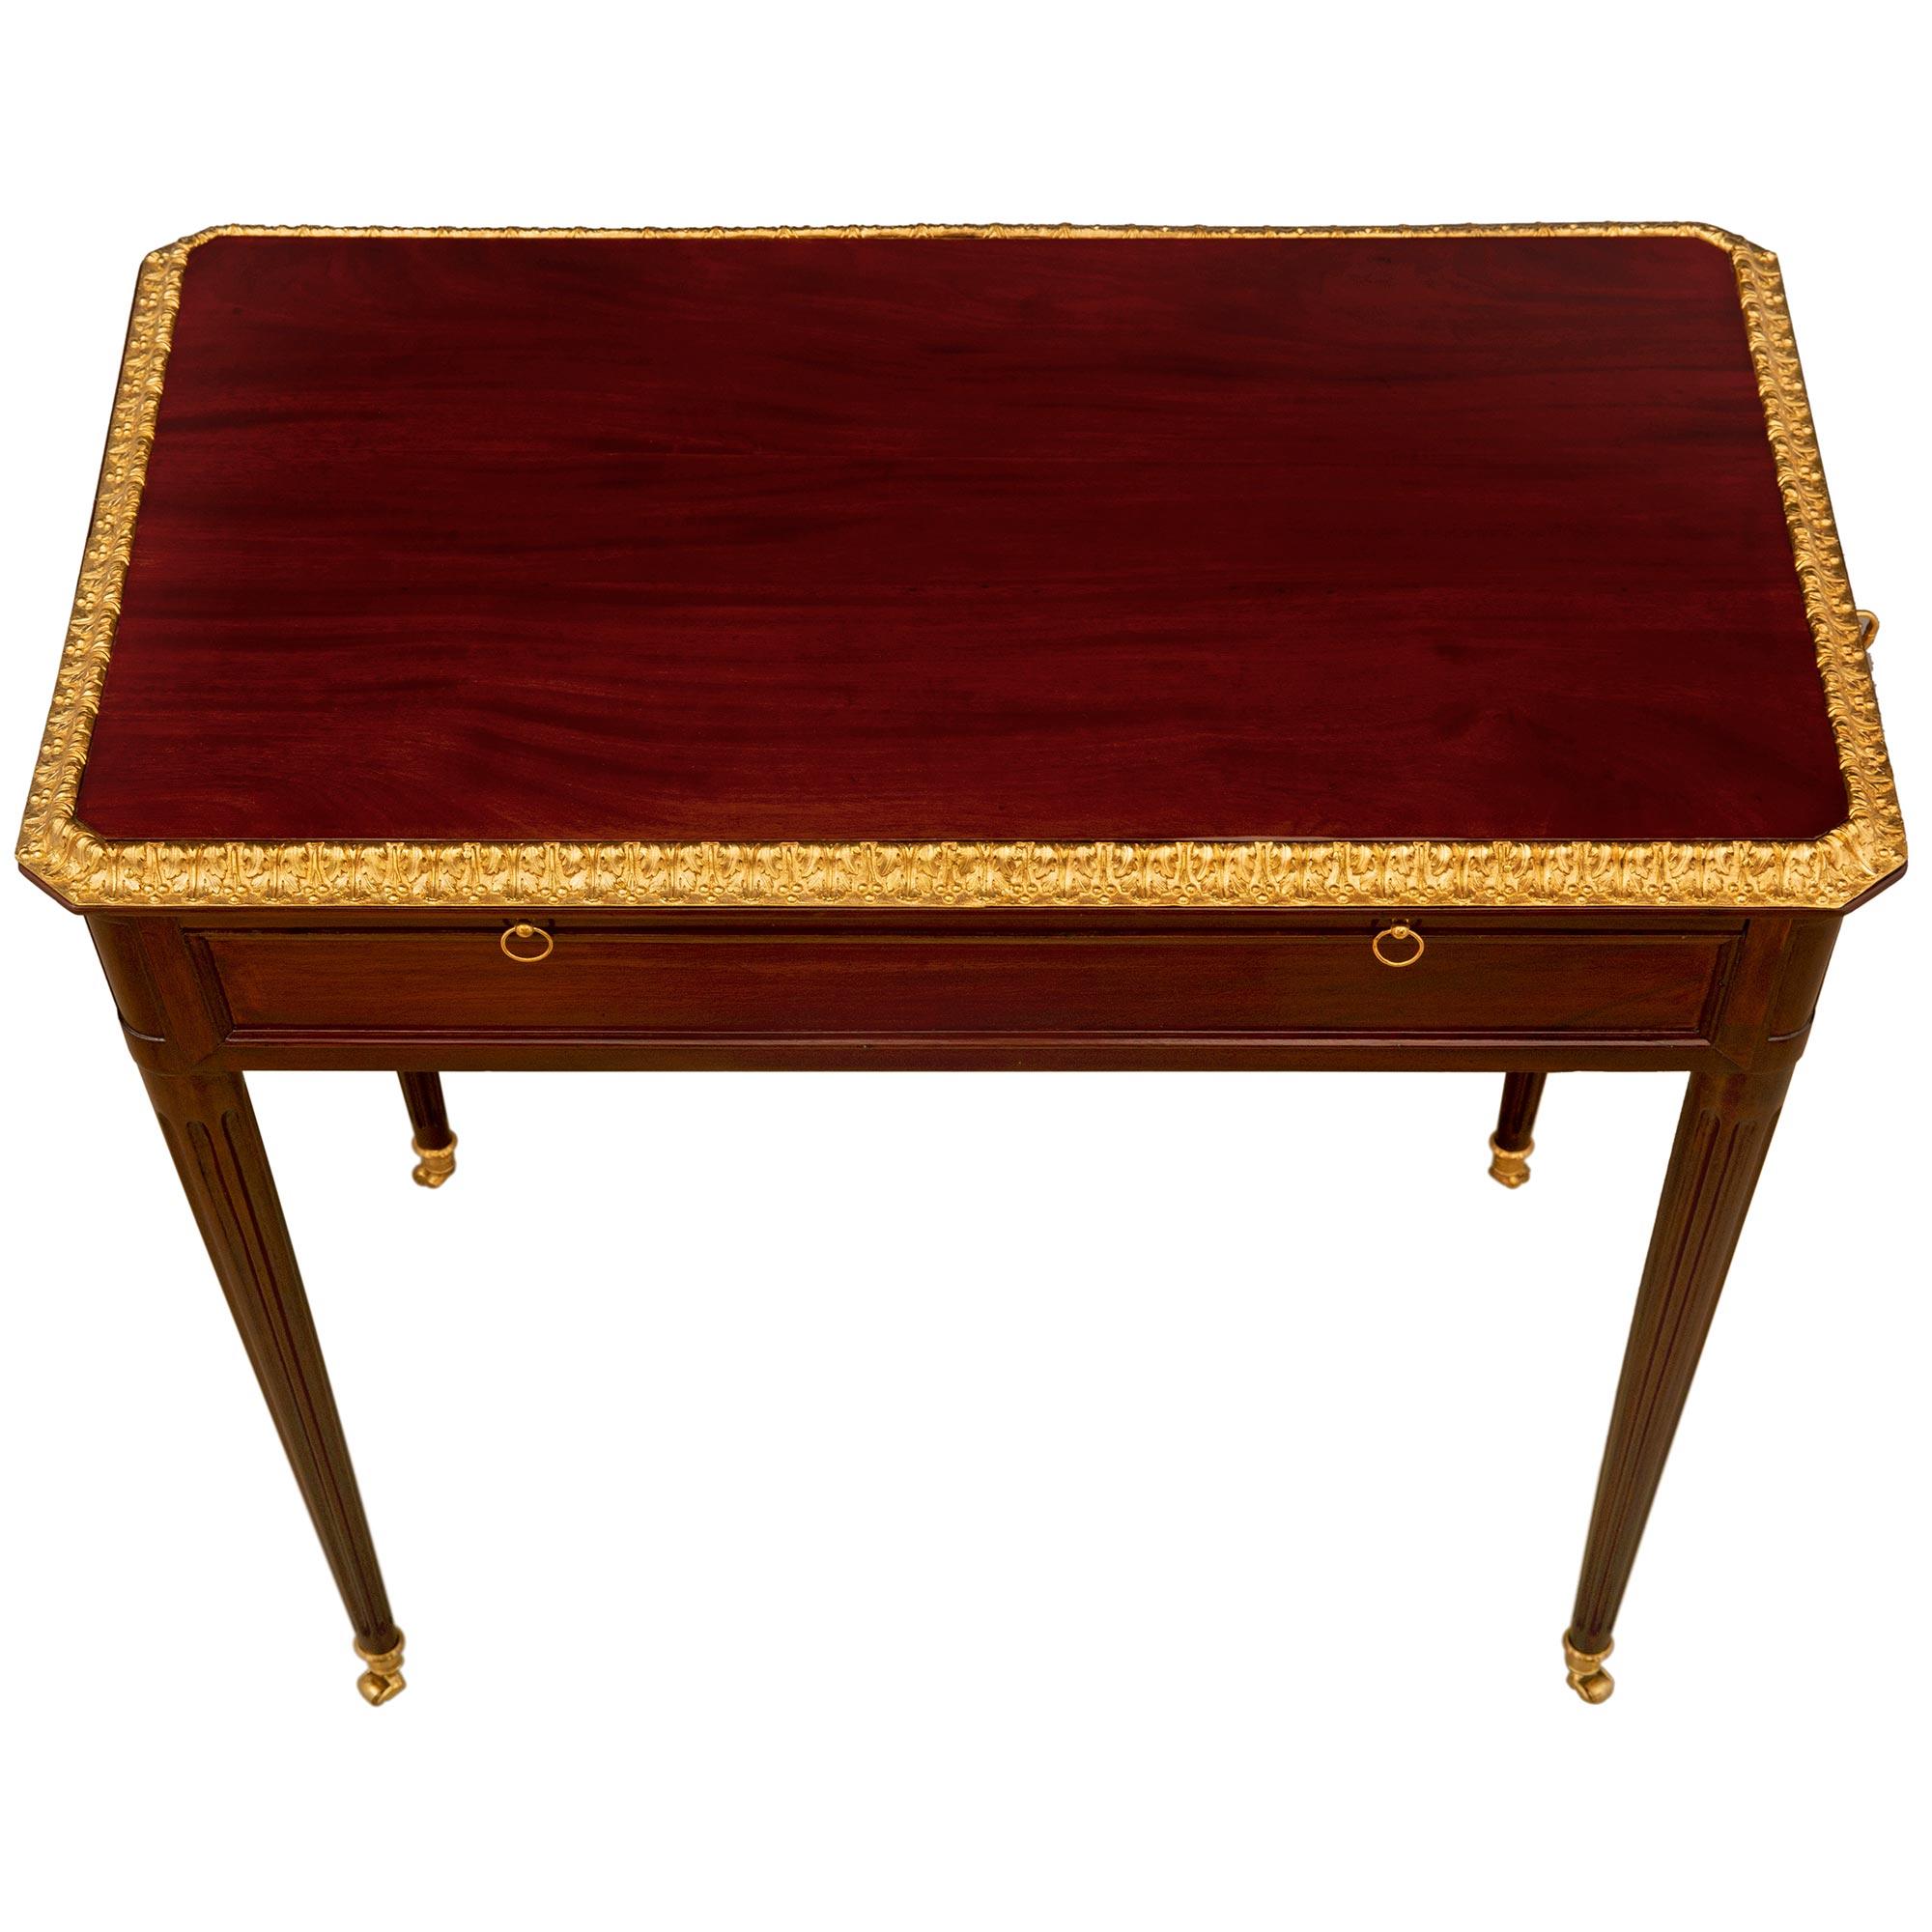 French 18th Century Louis XVI Period Mahogany and Ormolu Side Table / Desk For Sale 6